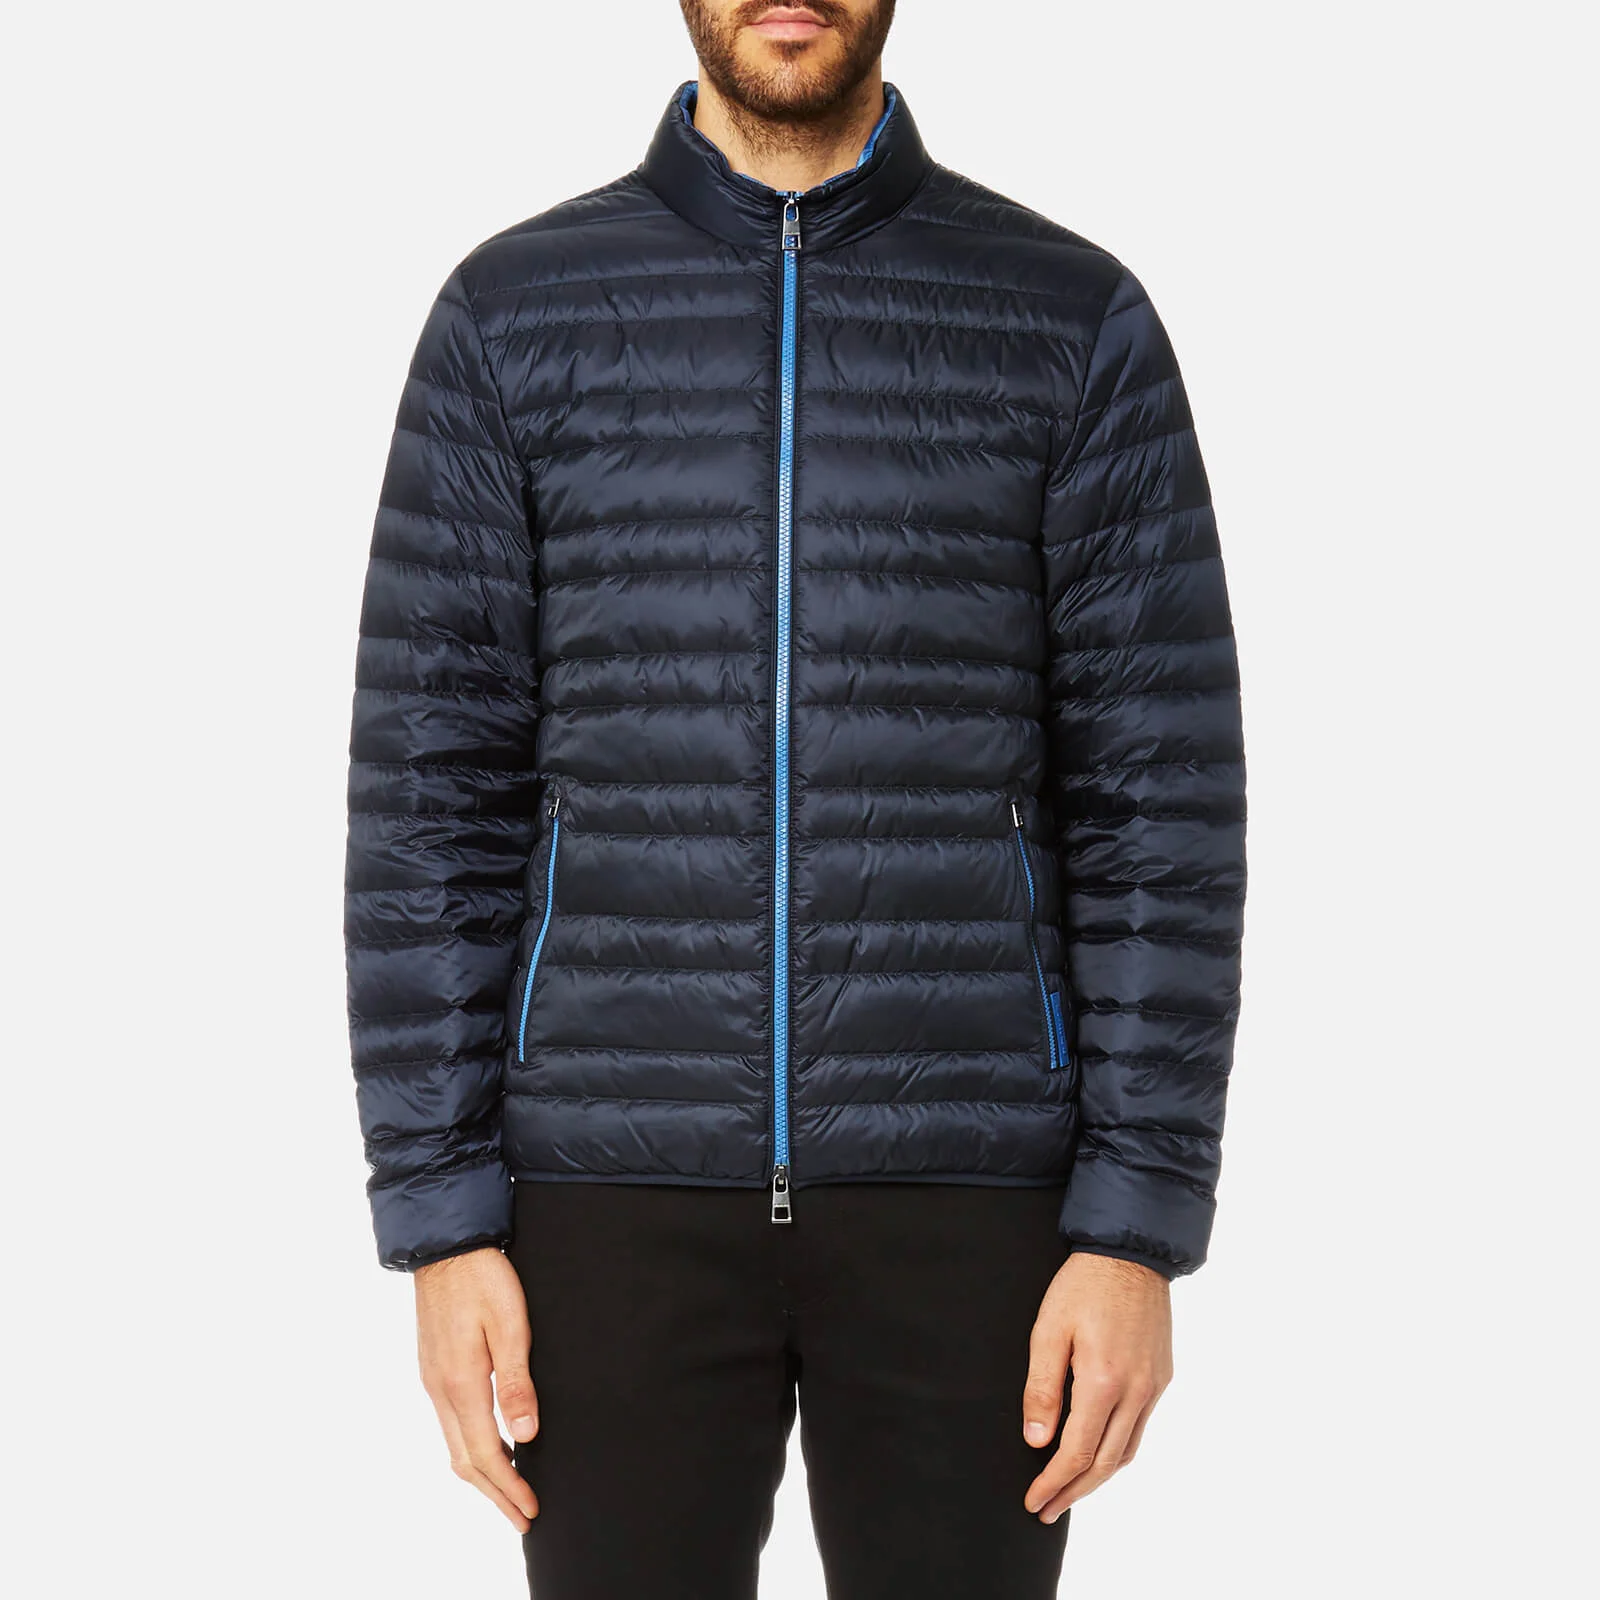 Michael Kors Men's Channel Quilted Jacket - Midnight Image 1